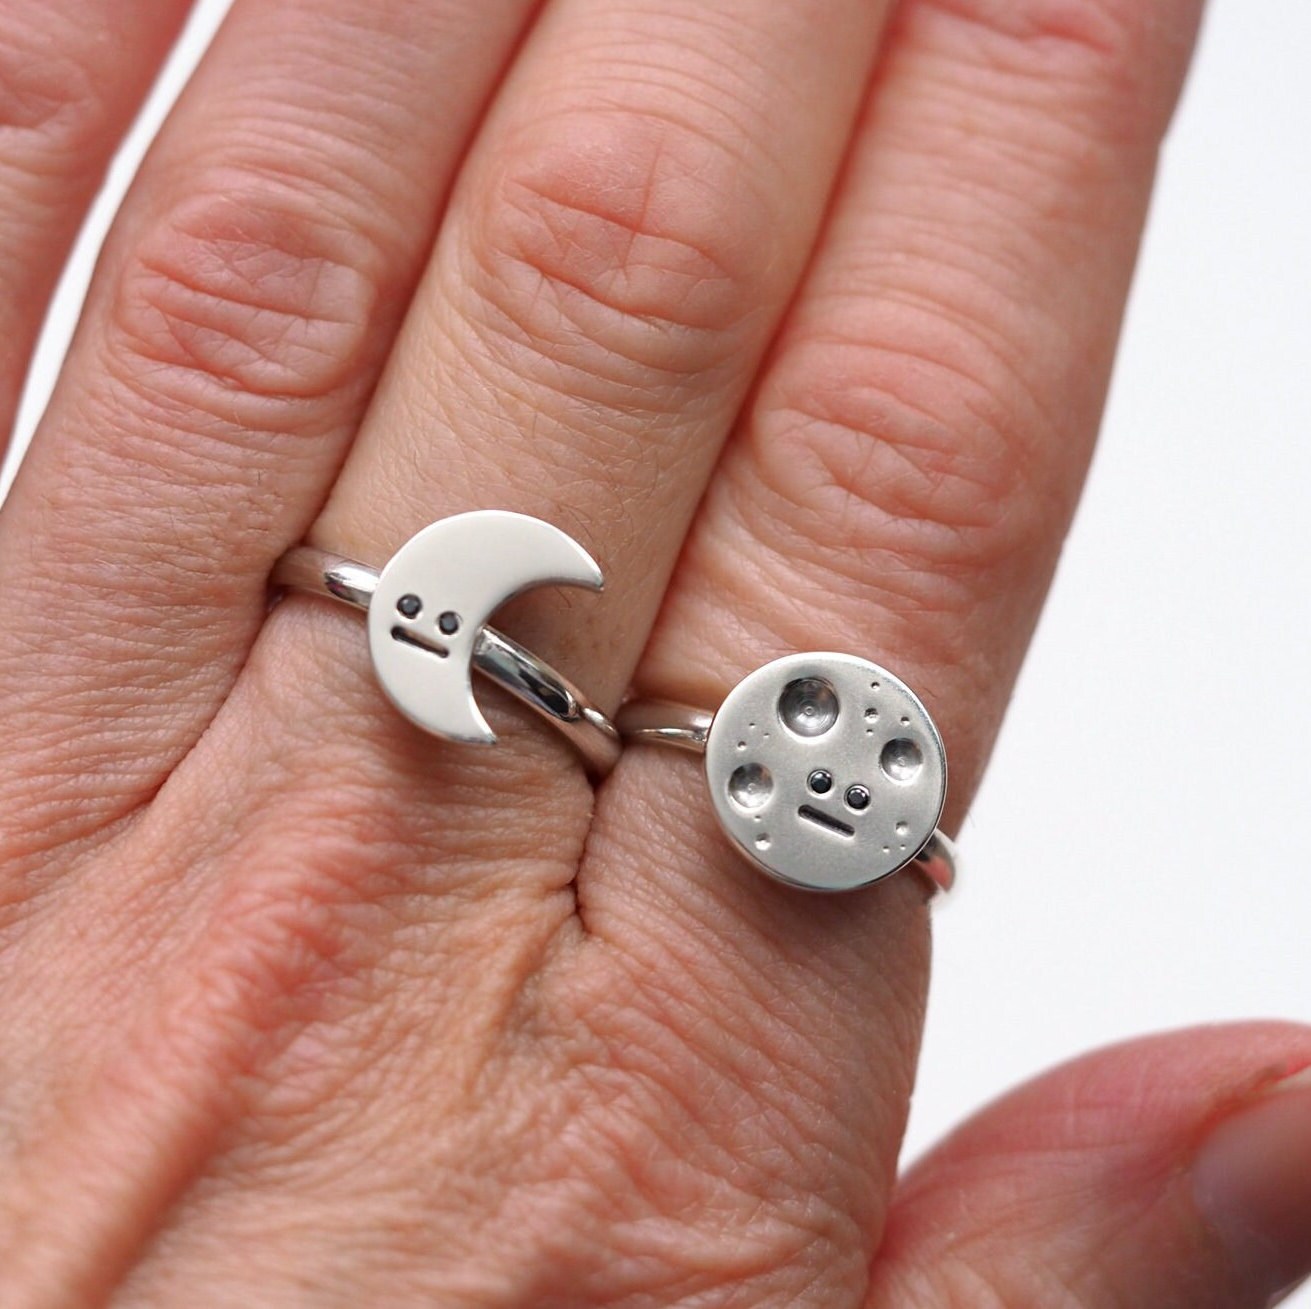 Crescent Moon Ring - Recycled Silver and Black Diamonds